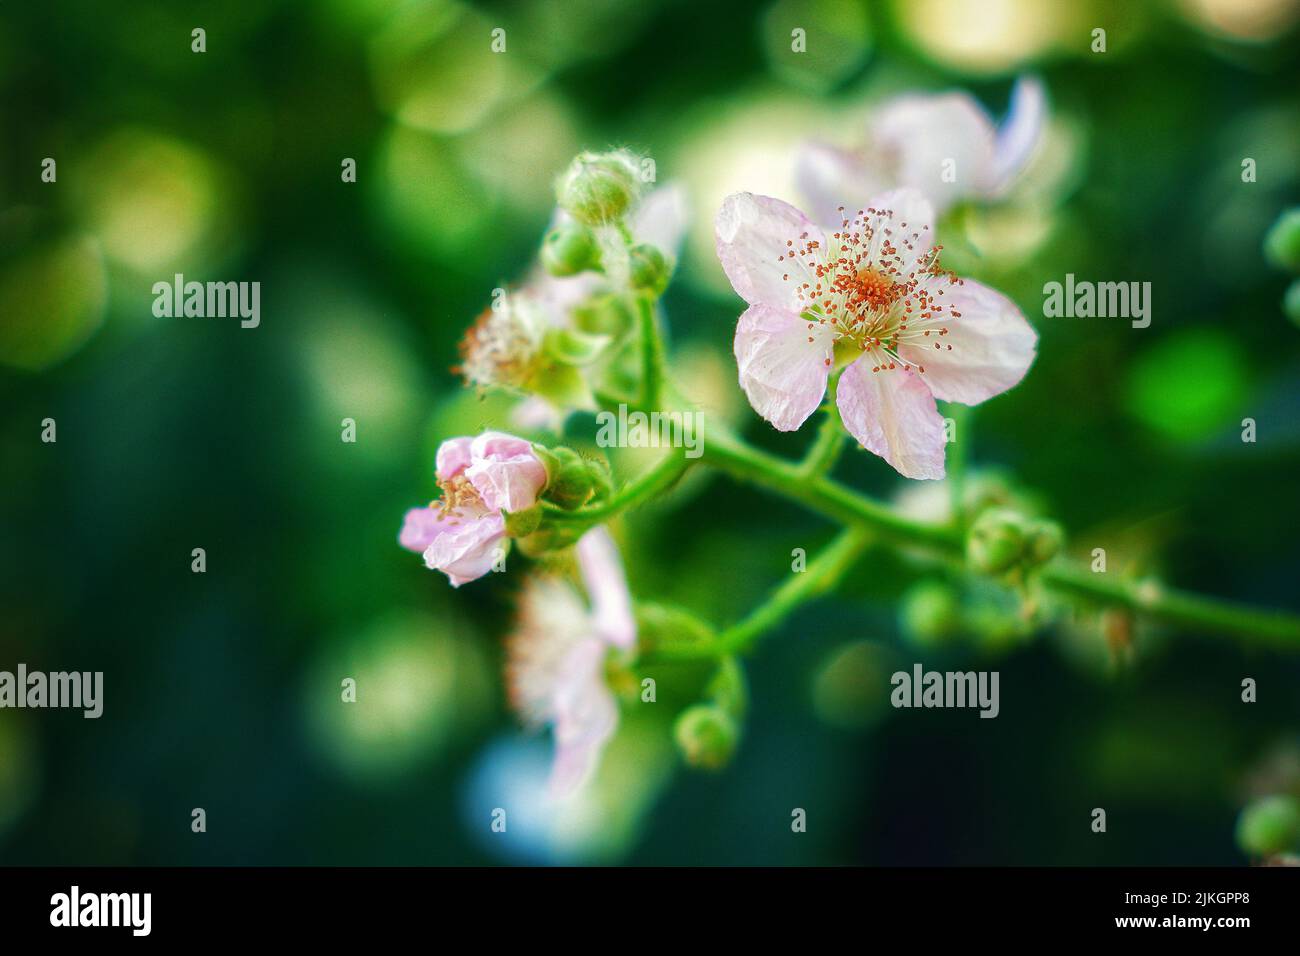 A selective focus shot of blackberry flowers in the garden Stock Photo